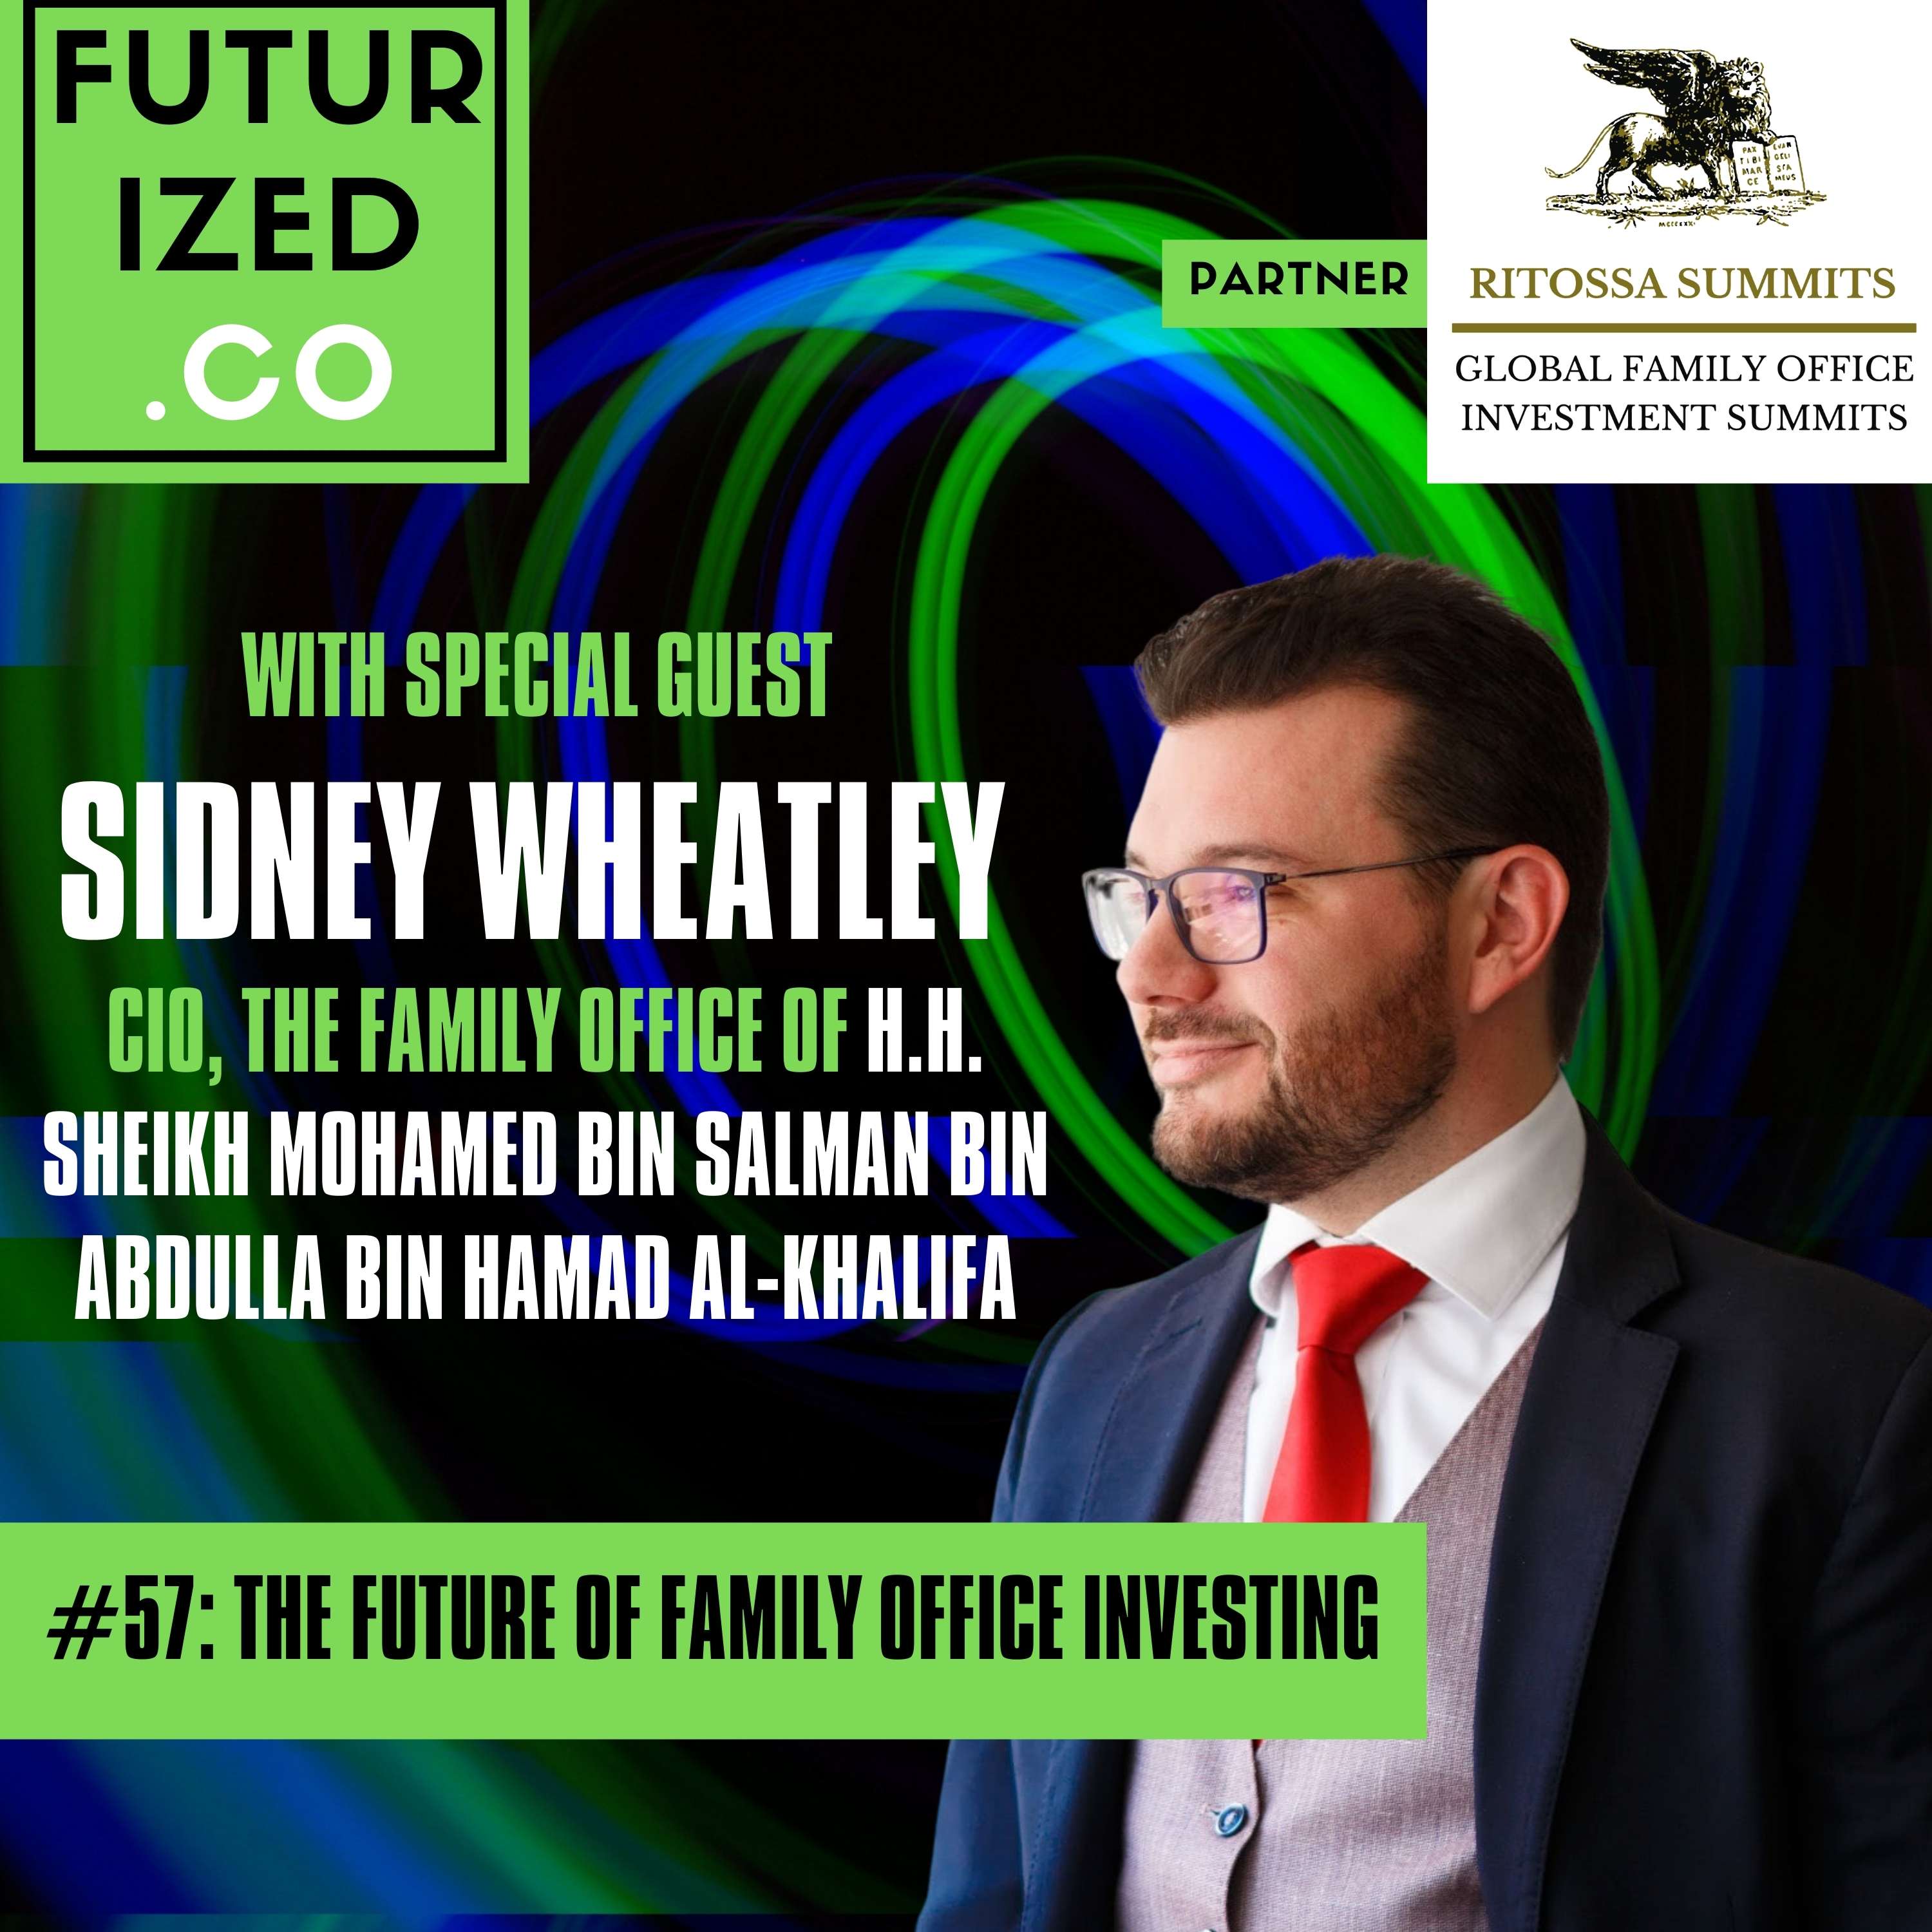 Future of Family Office Investing Image